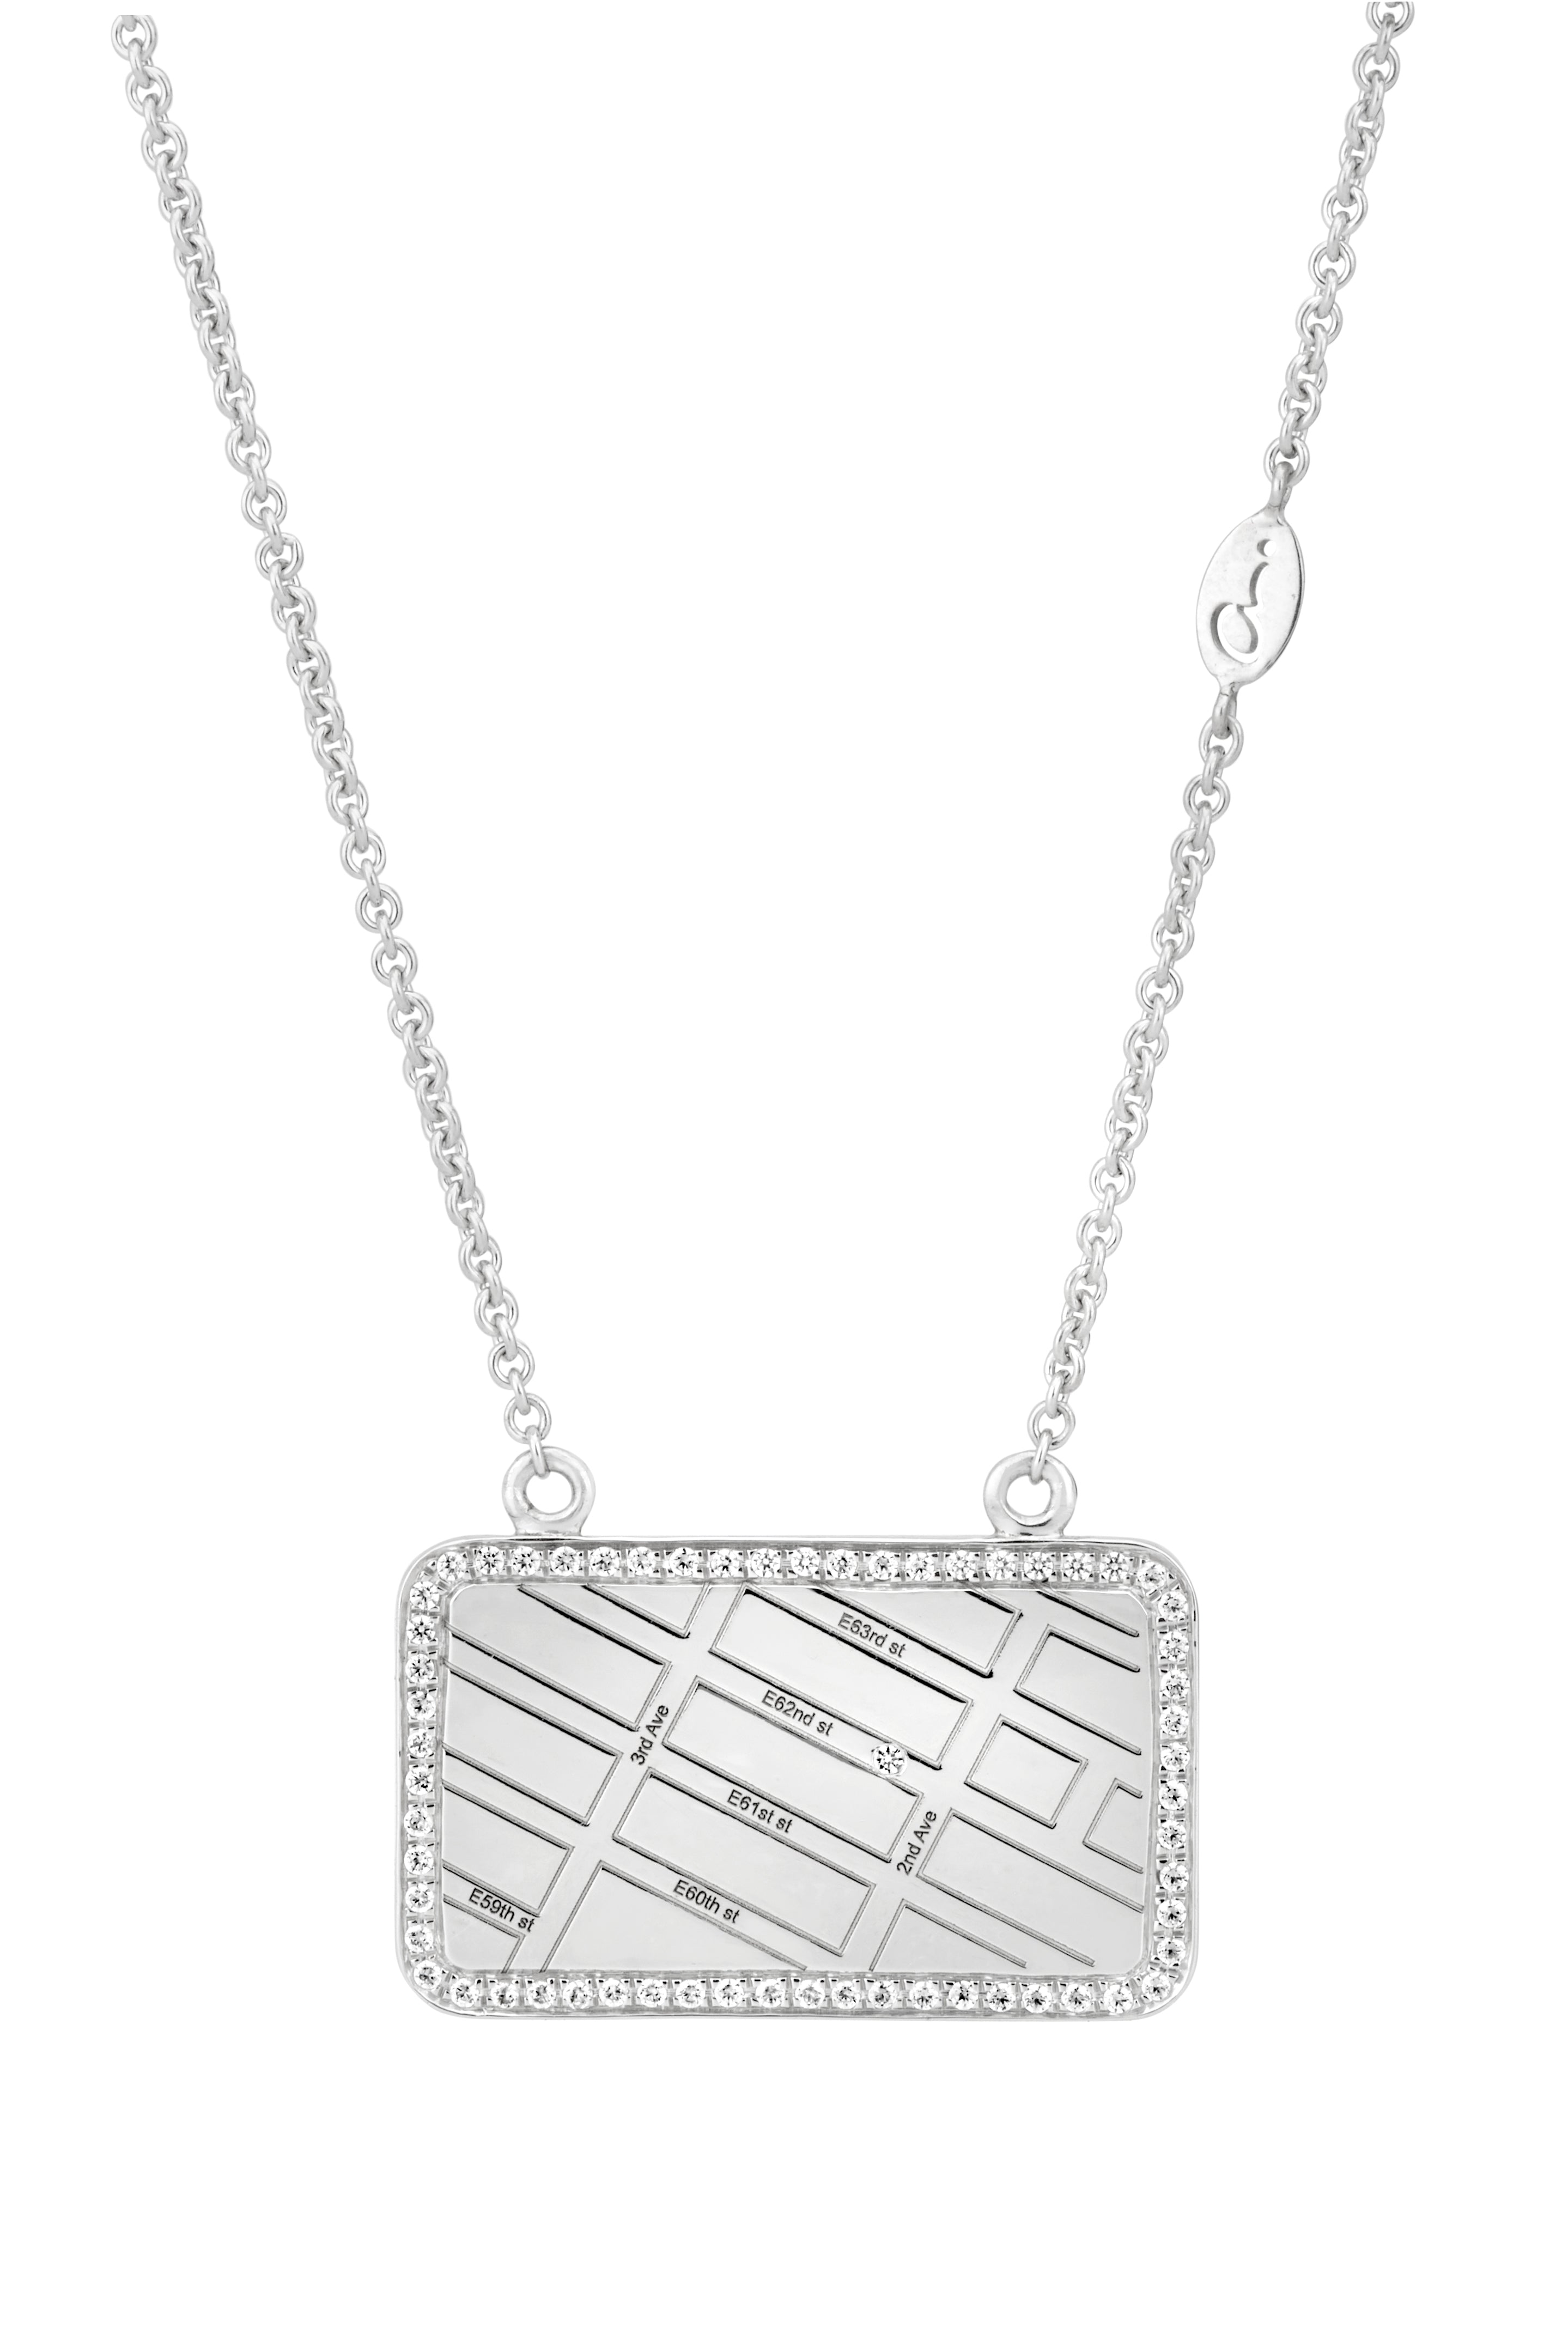 A.JAFFE  WHITE GOLD MAP NECKLACE WITH DIAMONDS